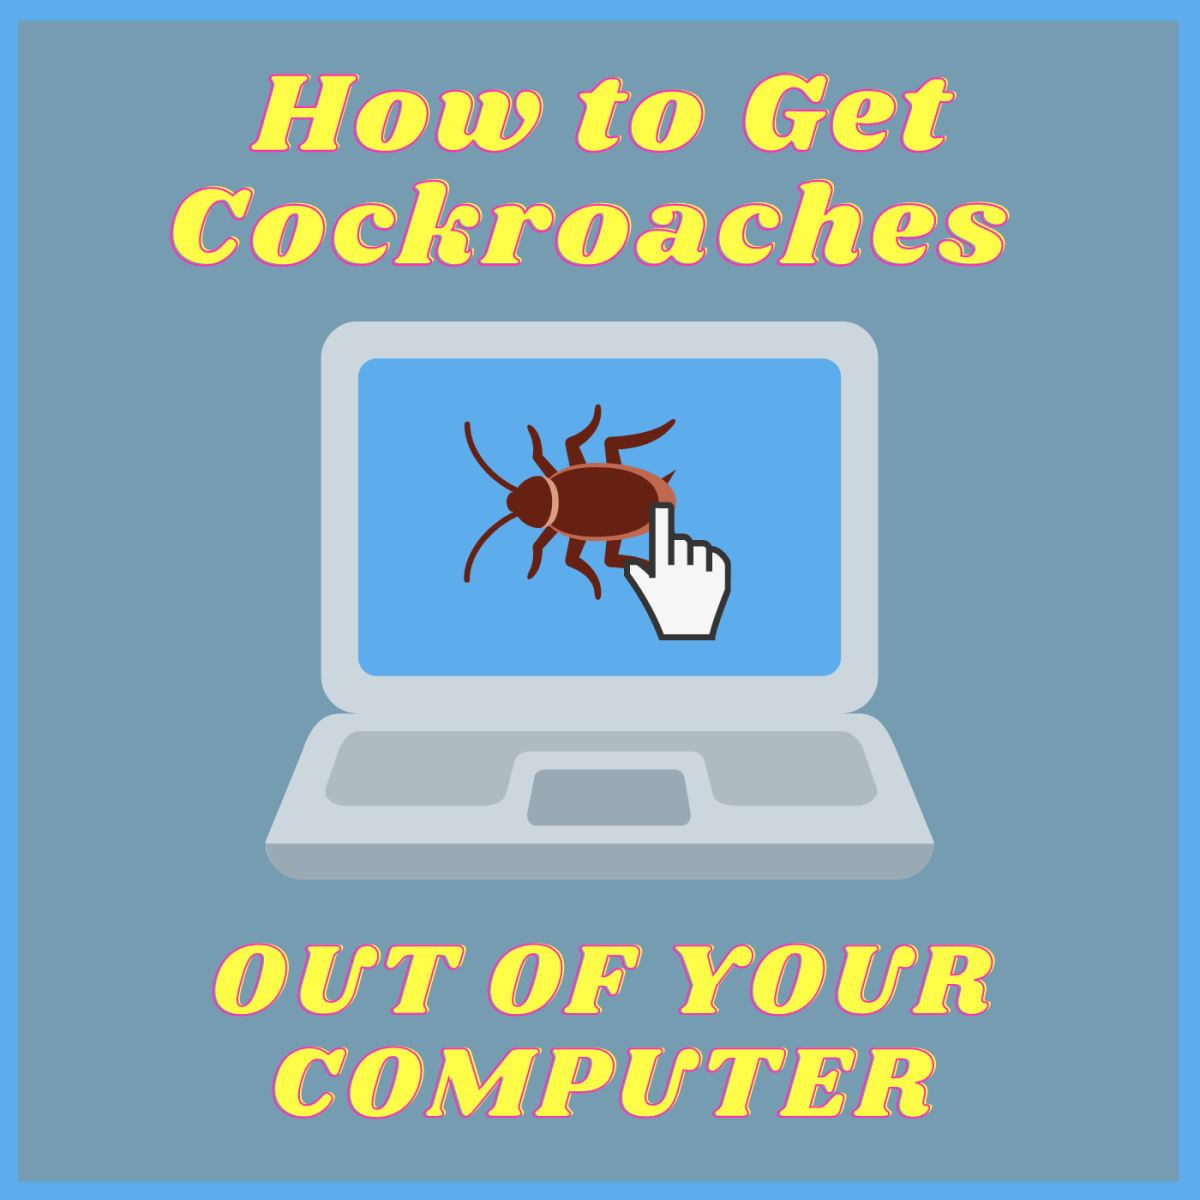 Flooding and storms can cause insects like cockroaches to seek shelter in new places—especially warm places like the inside of your computer. 